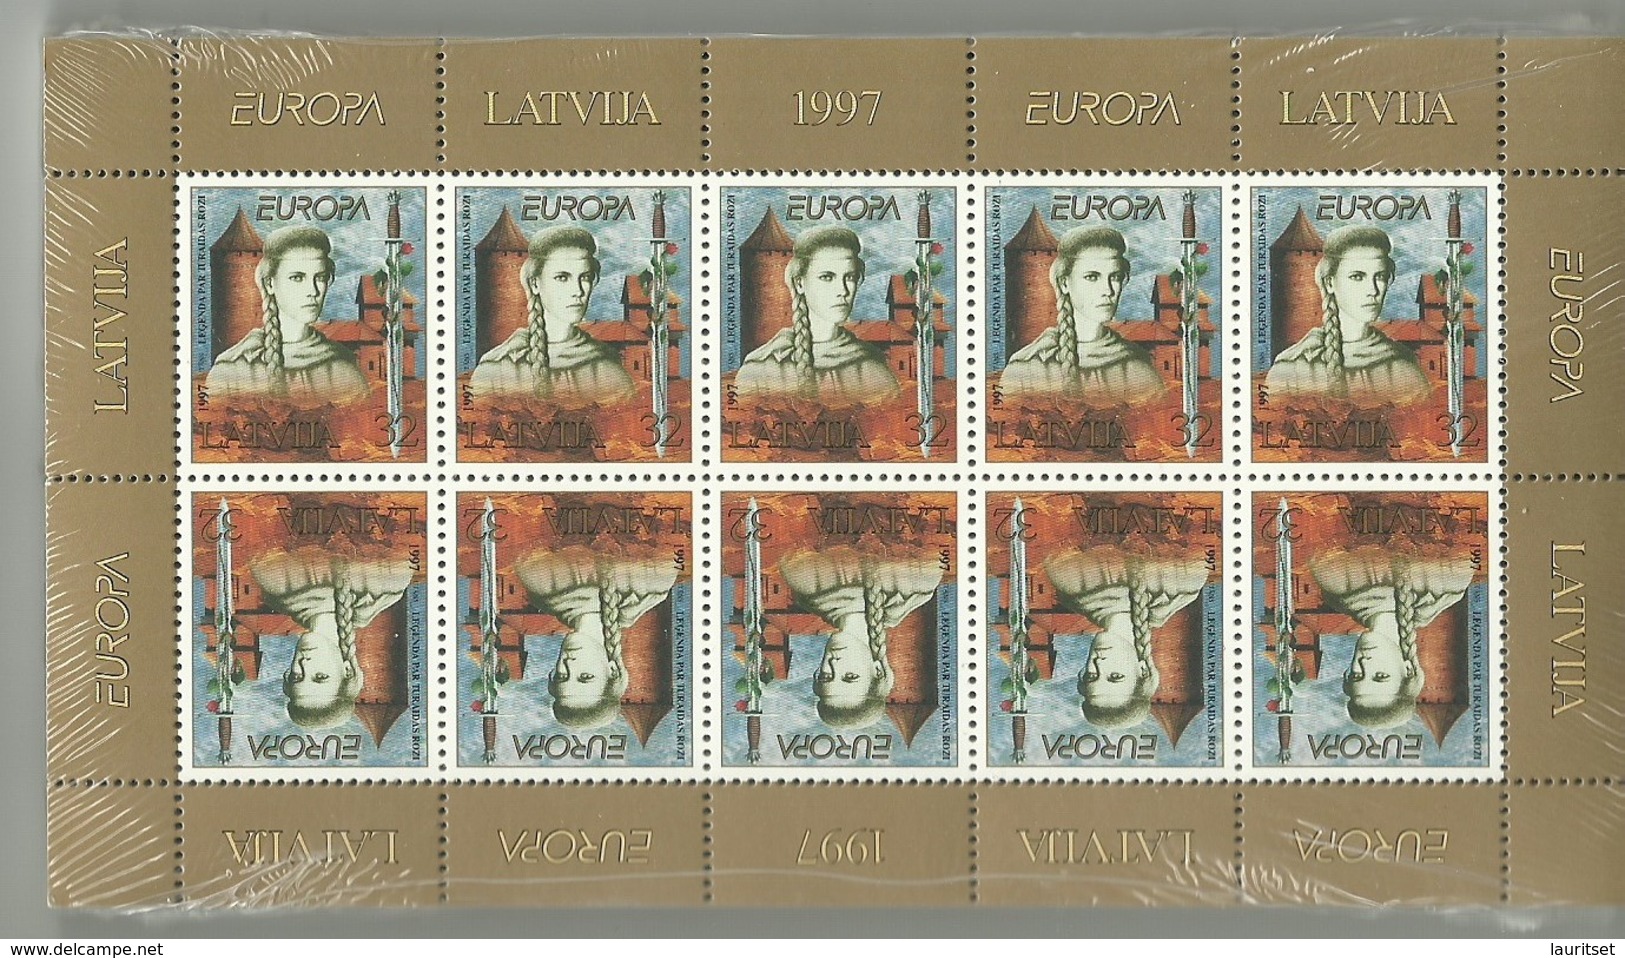 LETTLAND Latvia 1997 Michel 453 = 100 Sheets X 10 Stamps = 1000 Stamps Europa CEPT  MNH - Lettonie